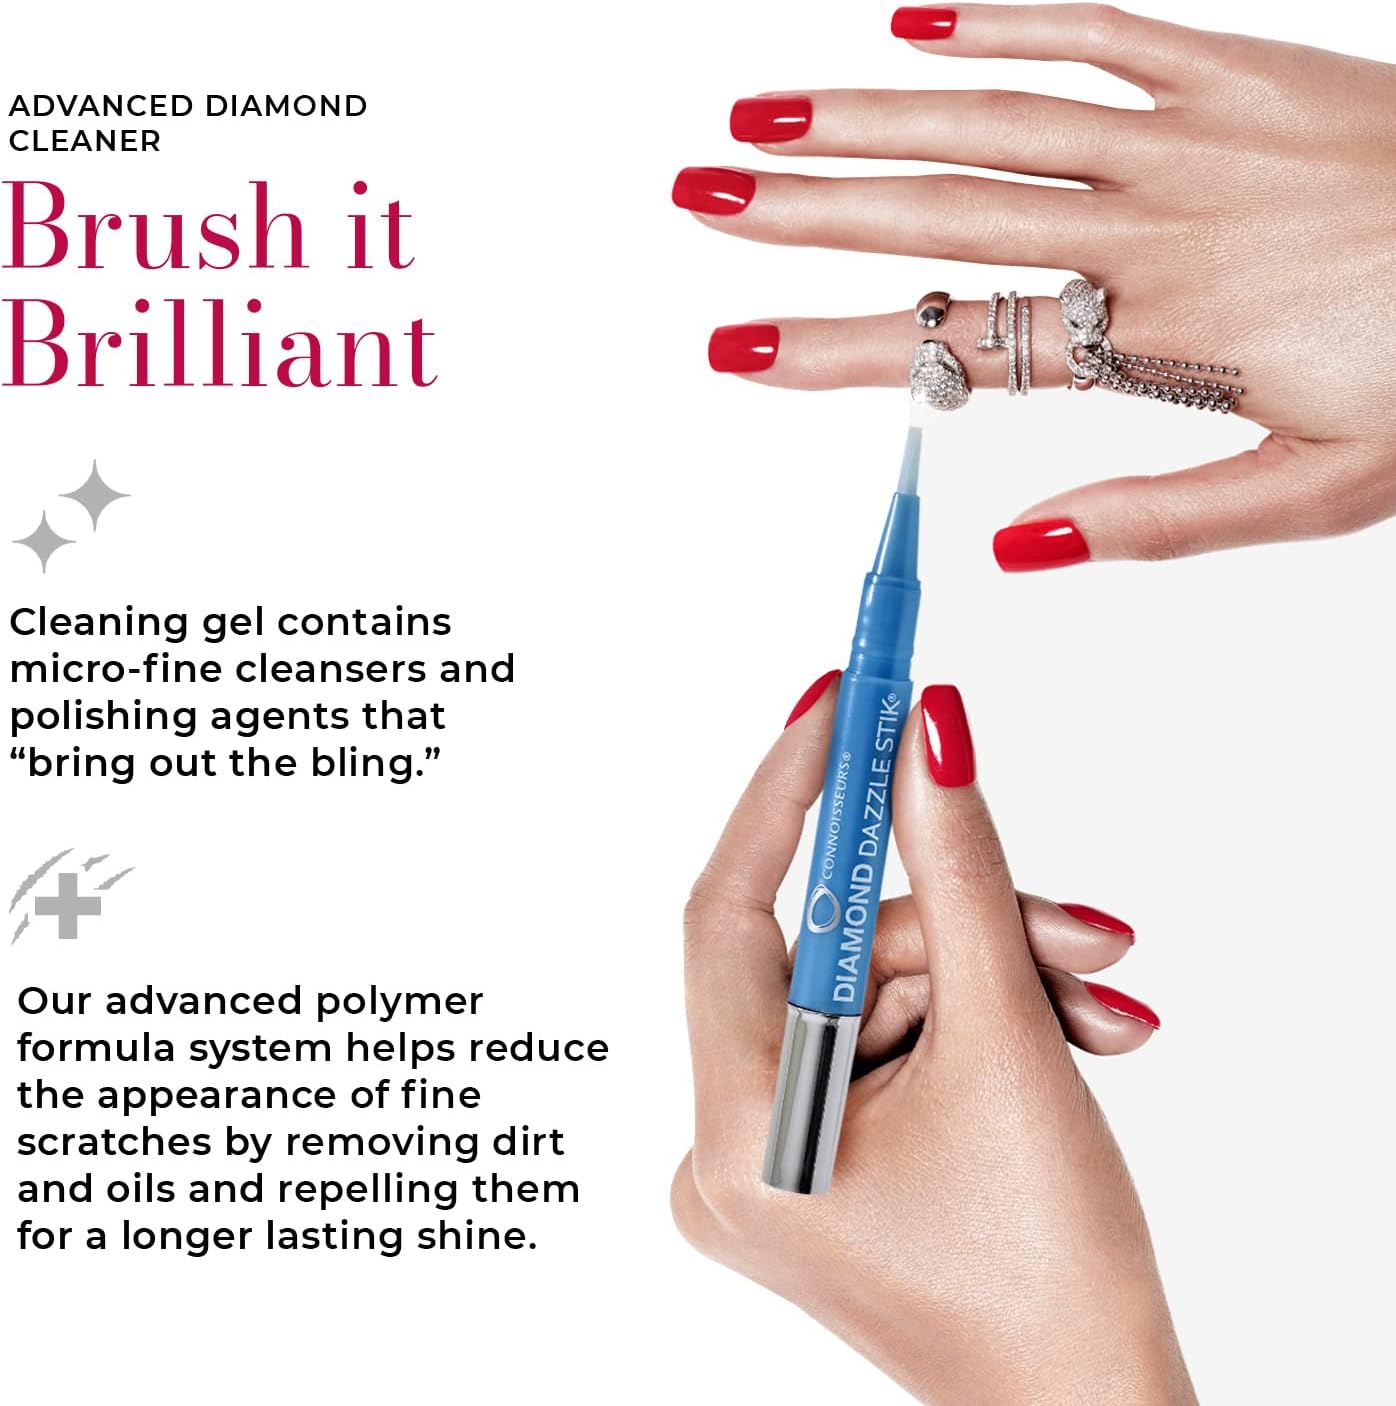 CONNOISSEURS Diamond Dazzle Stik - Portable Diamond Cleaner for Rings and Other Jewelry - Bring Out The Sparkle in Your Diamonds and Precious Stones Dazzle Stik (3 pack) - image 3 of 7